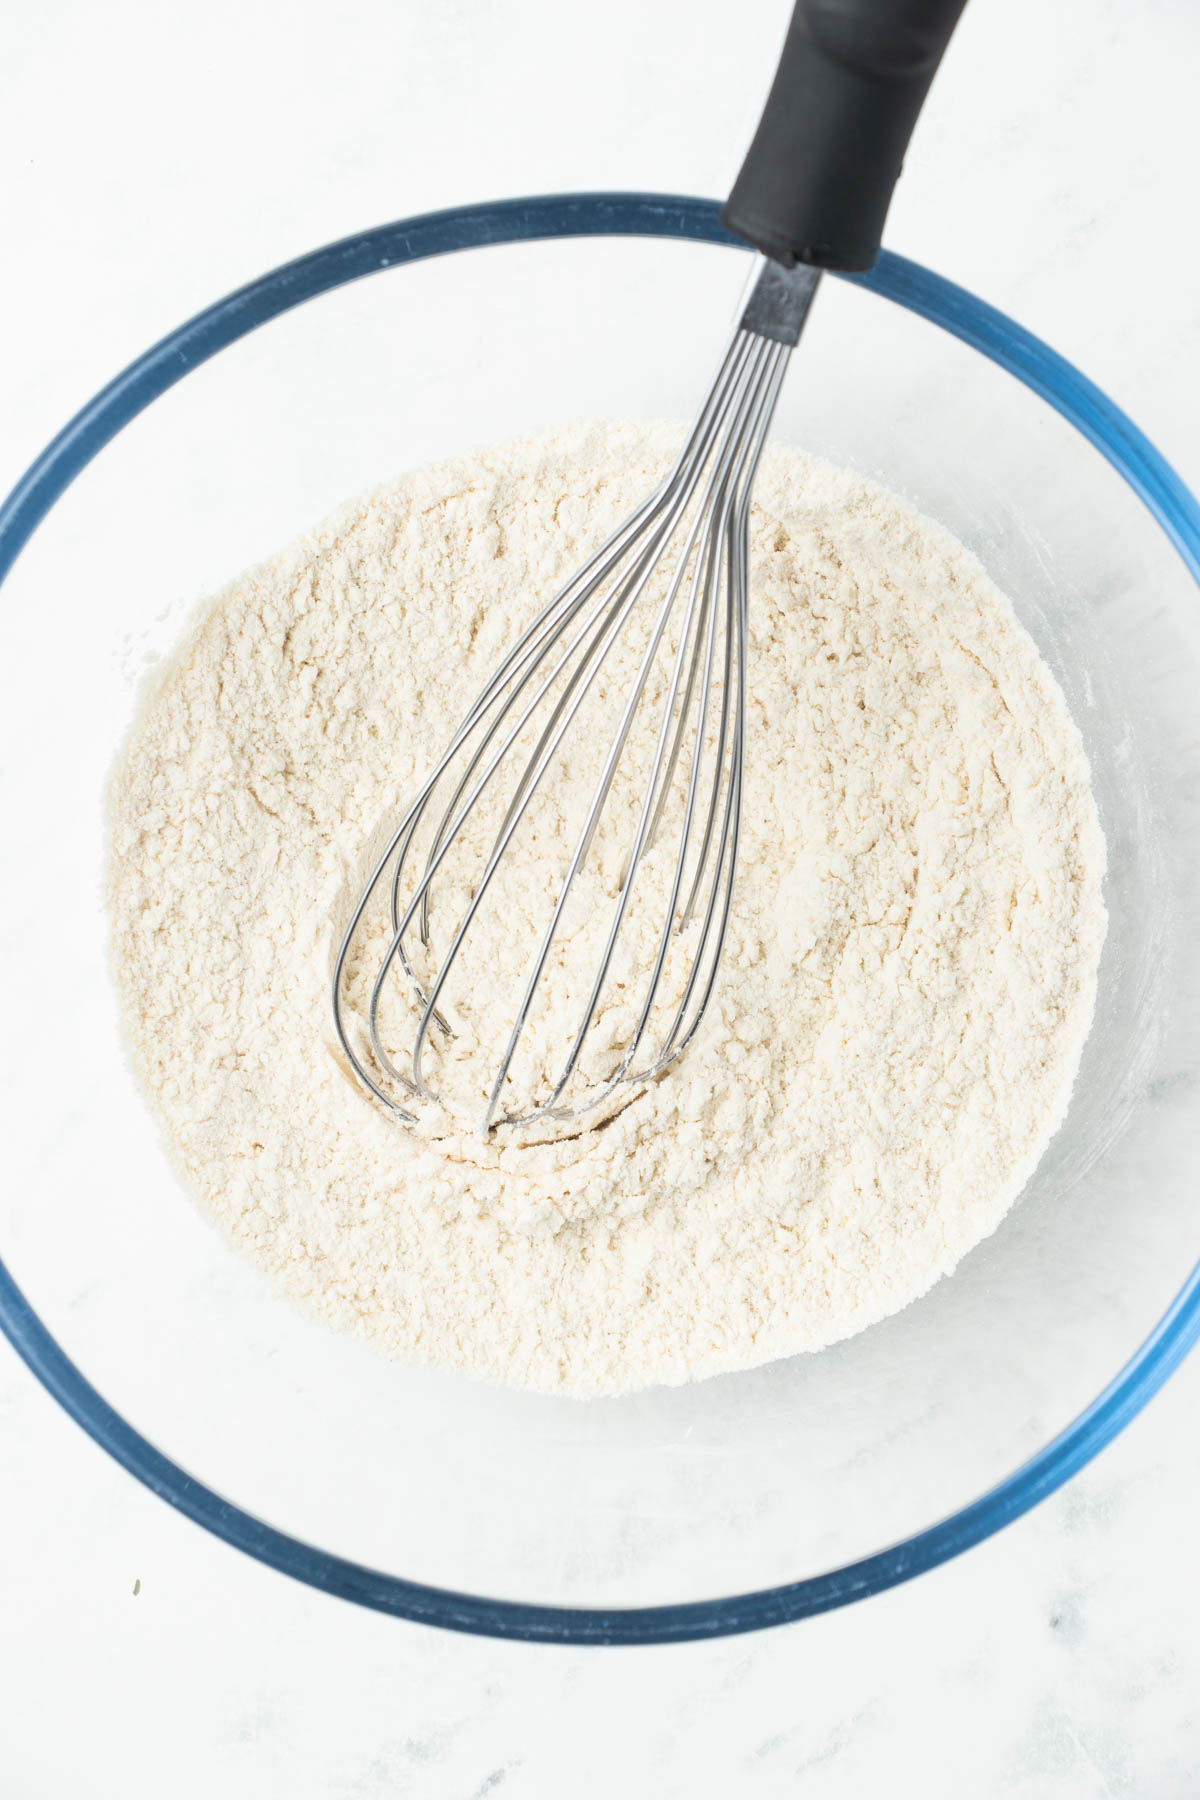 Whisking flour in a glass bowl.